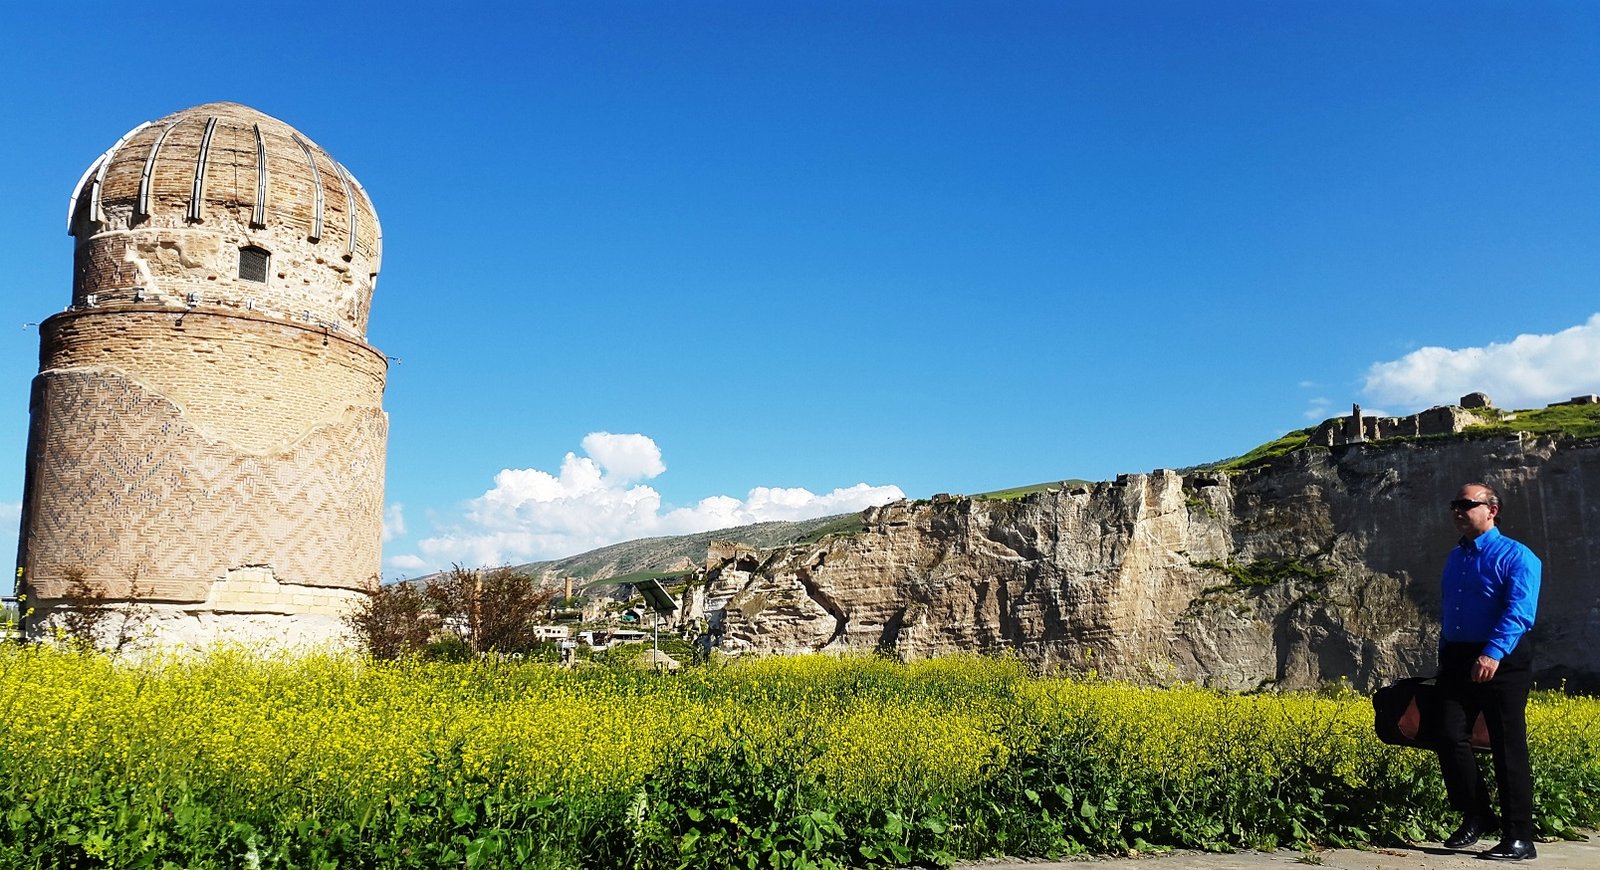 Zeynel Bey's Tomb in Hasankeyf, dating from 1473, has since been lifted and carried away!